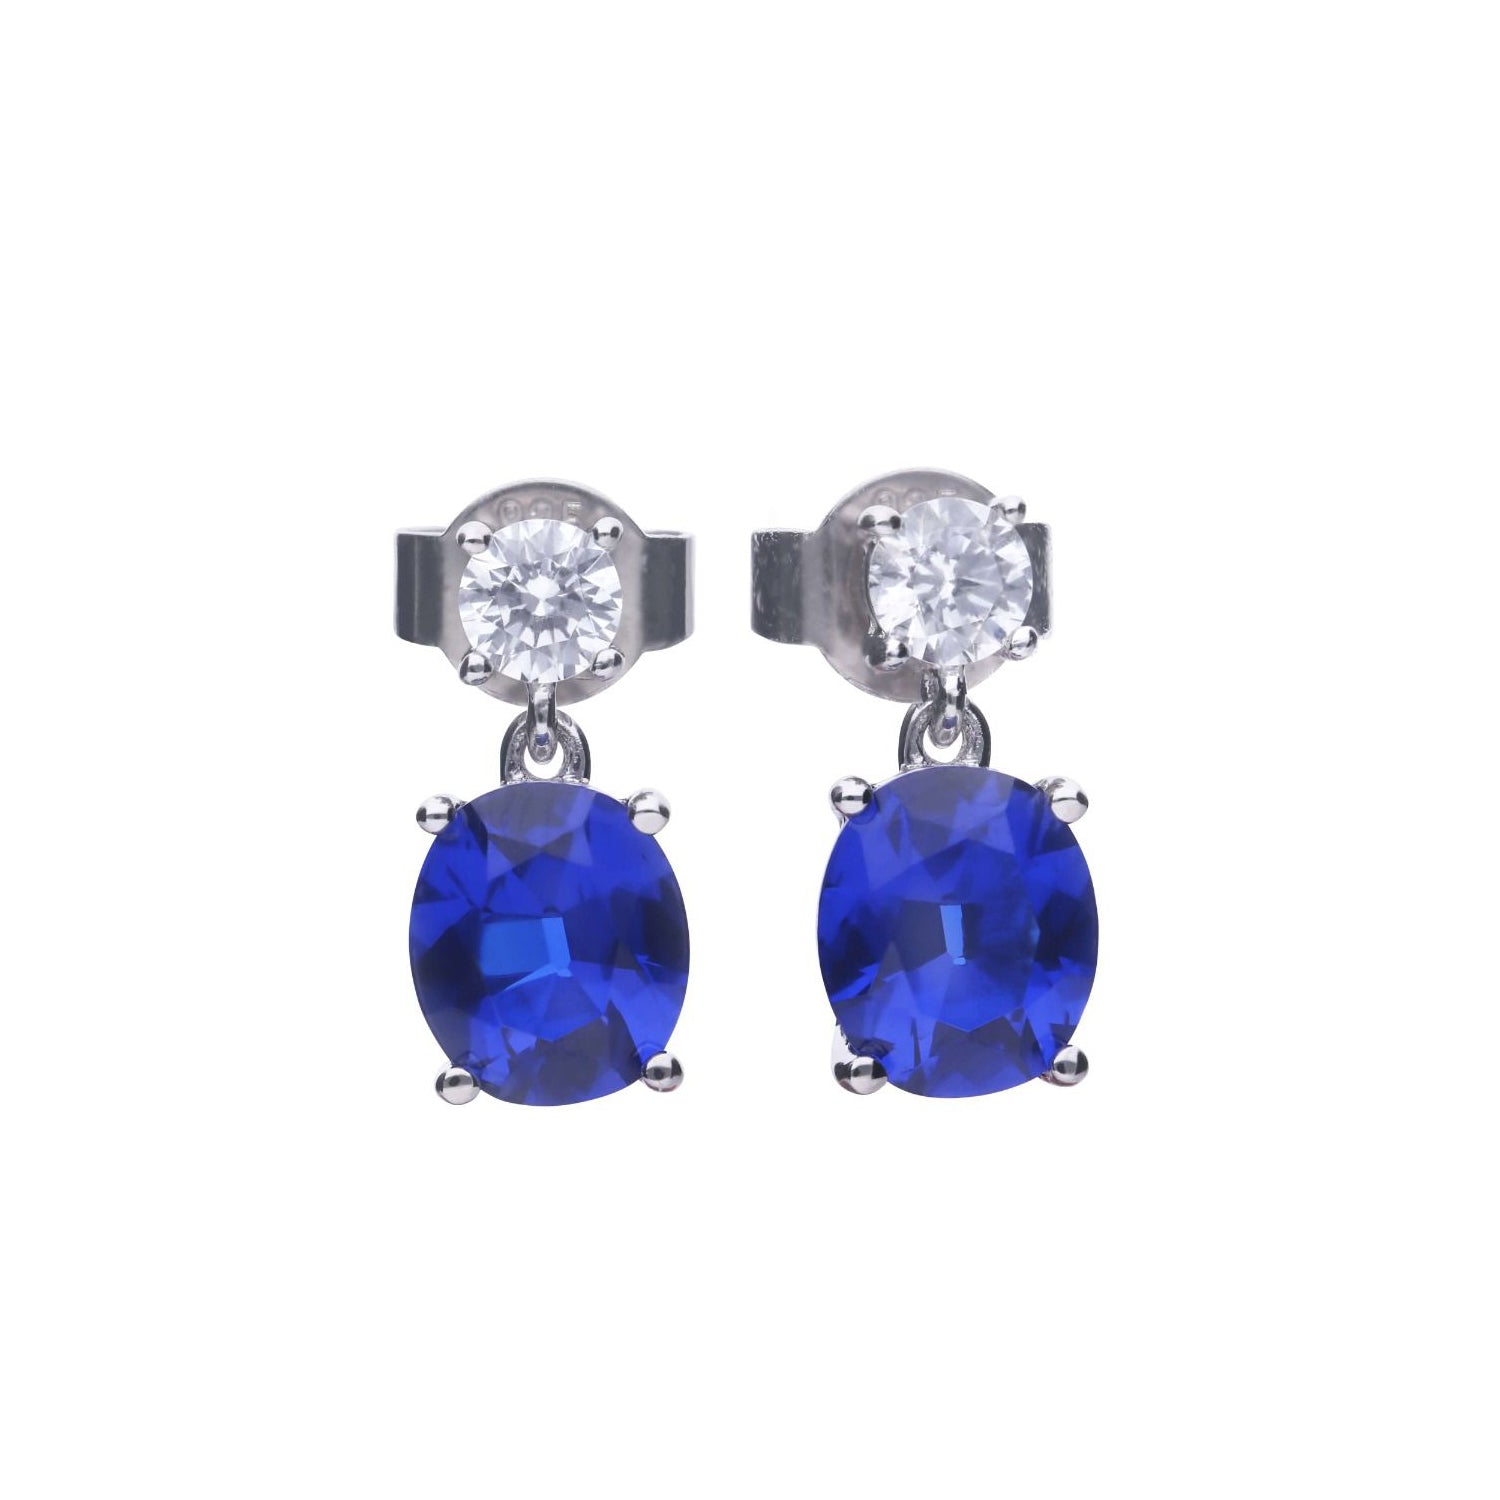 Silver and Sapphire Zirconia Oval Drop Earrings